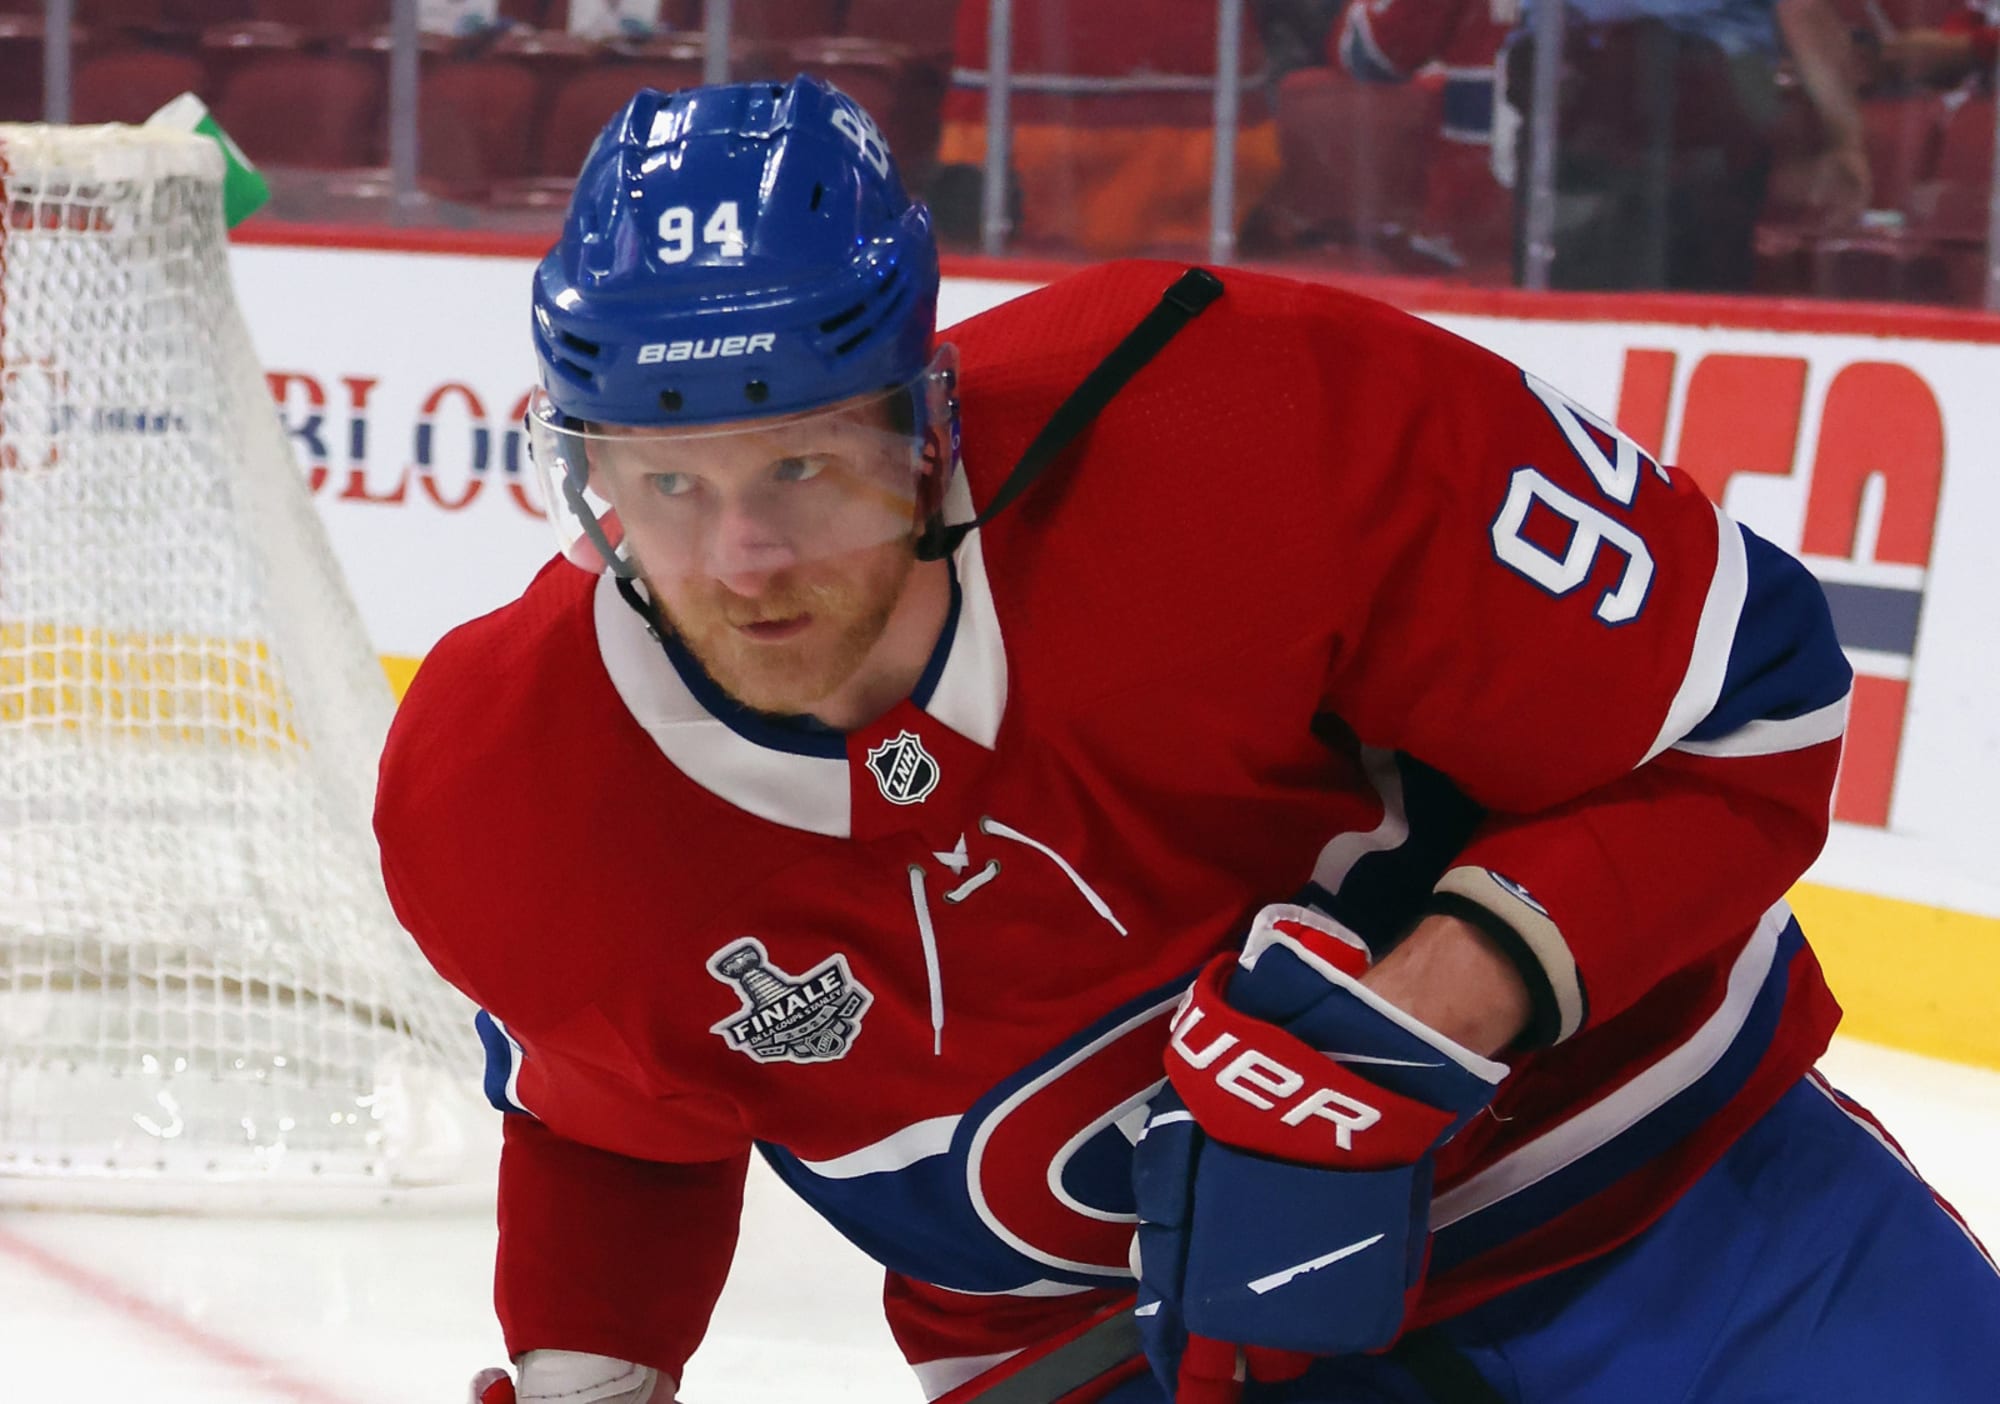 Former league MVP Corey Perry will be in the Canadiens lineup on